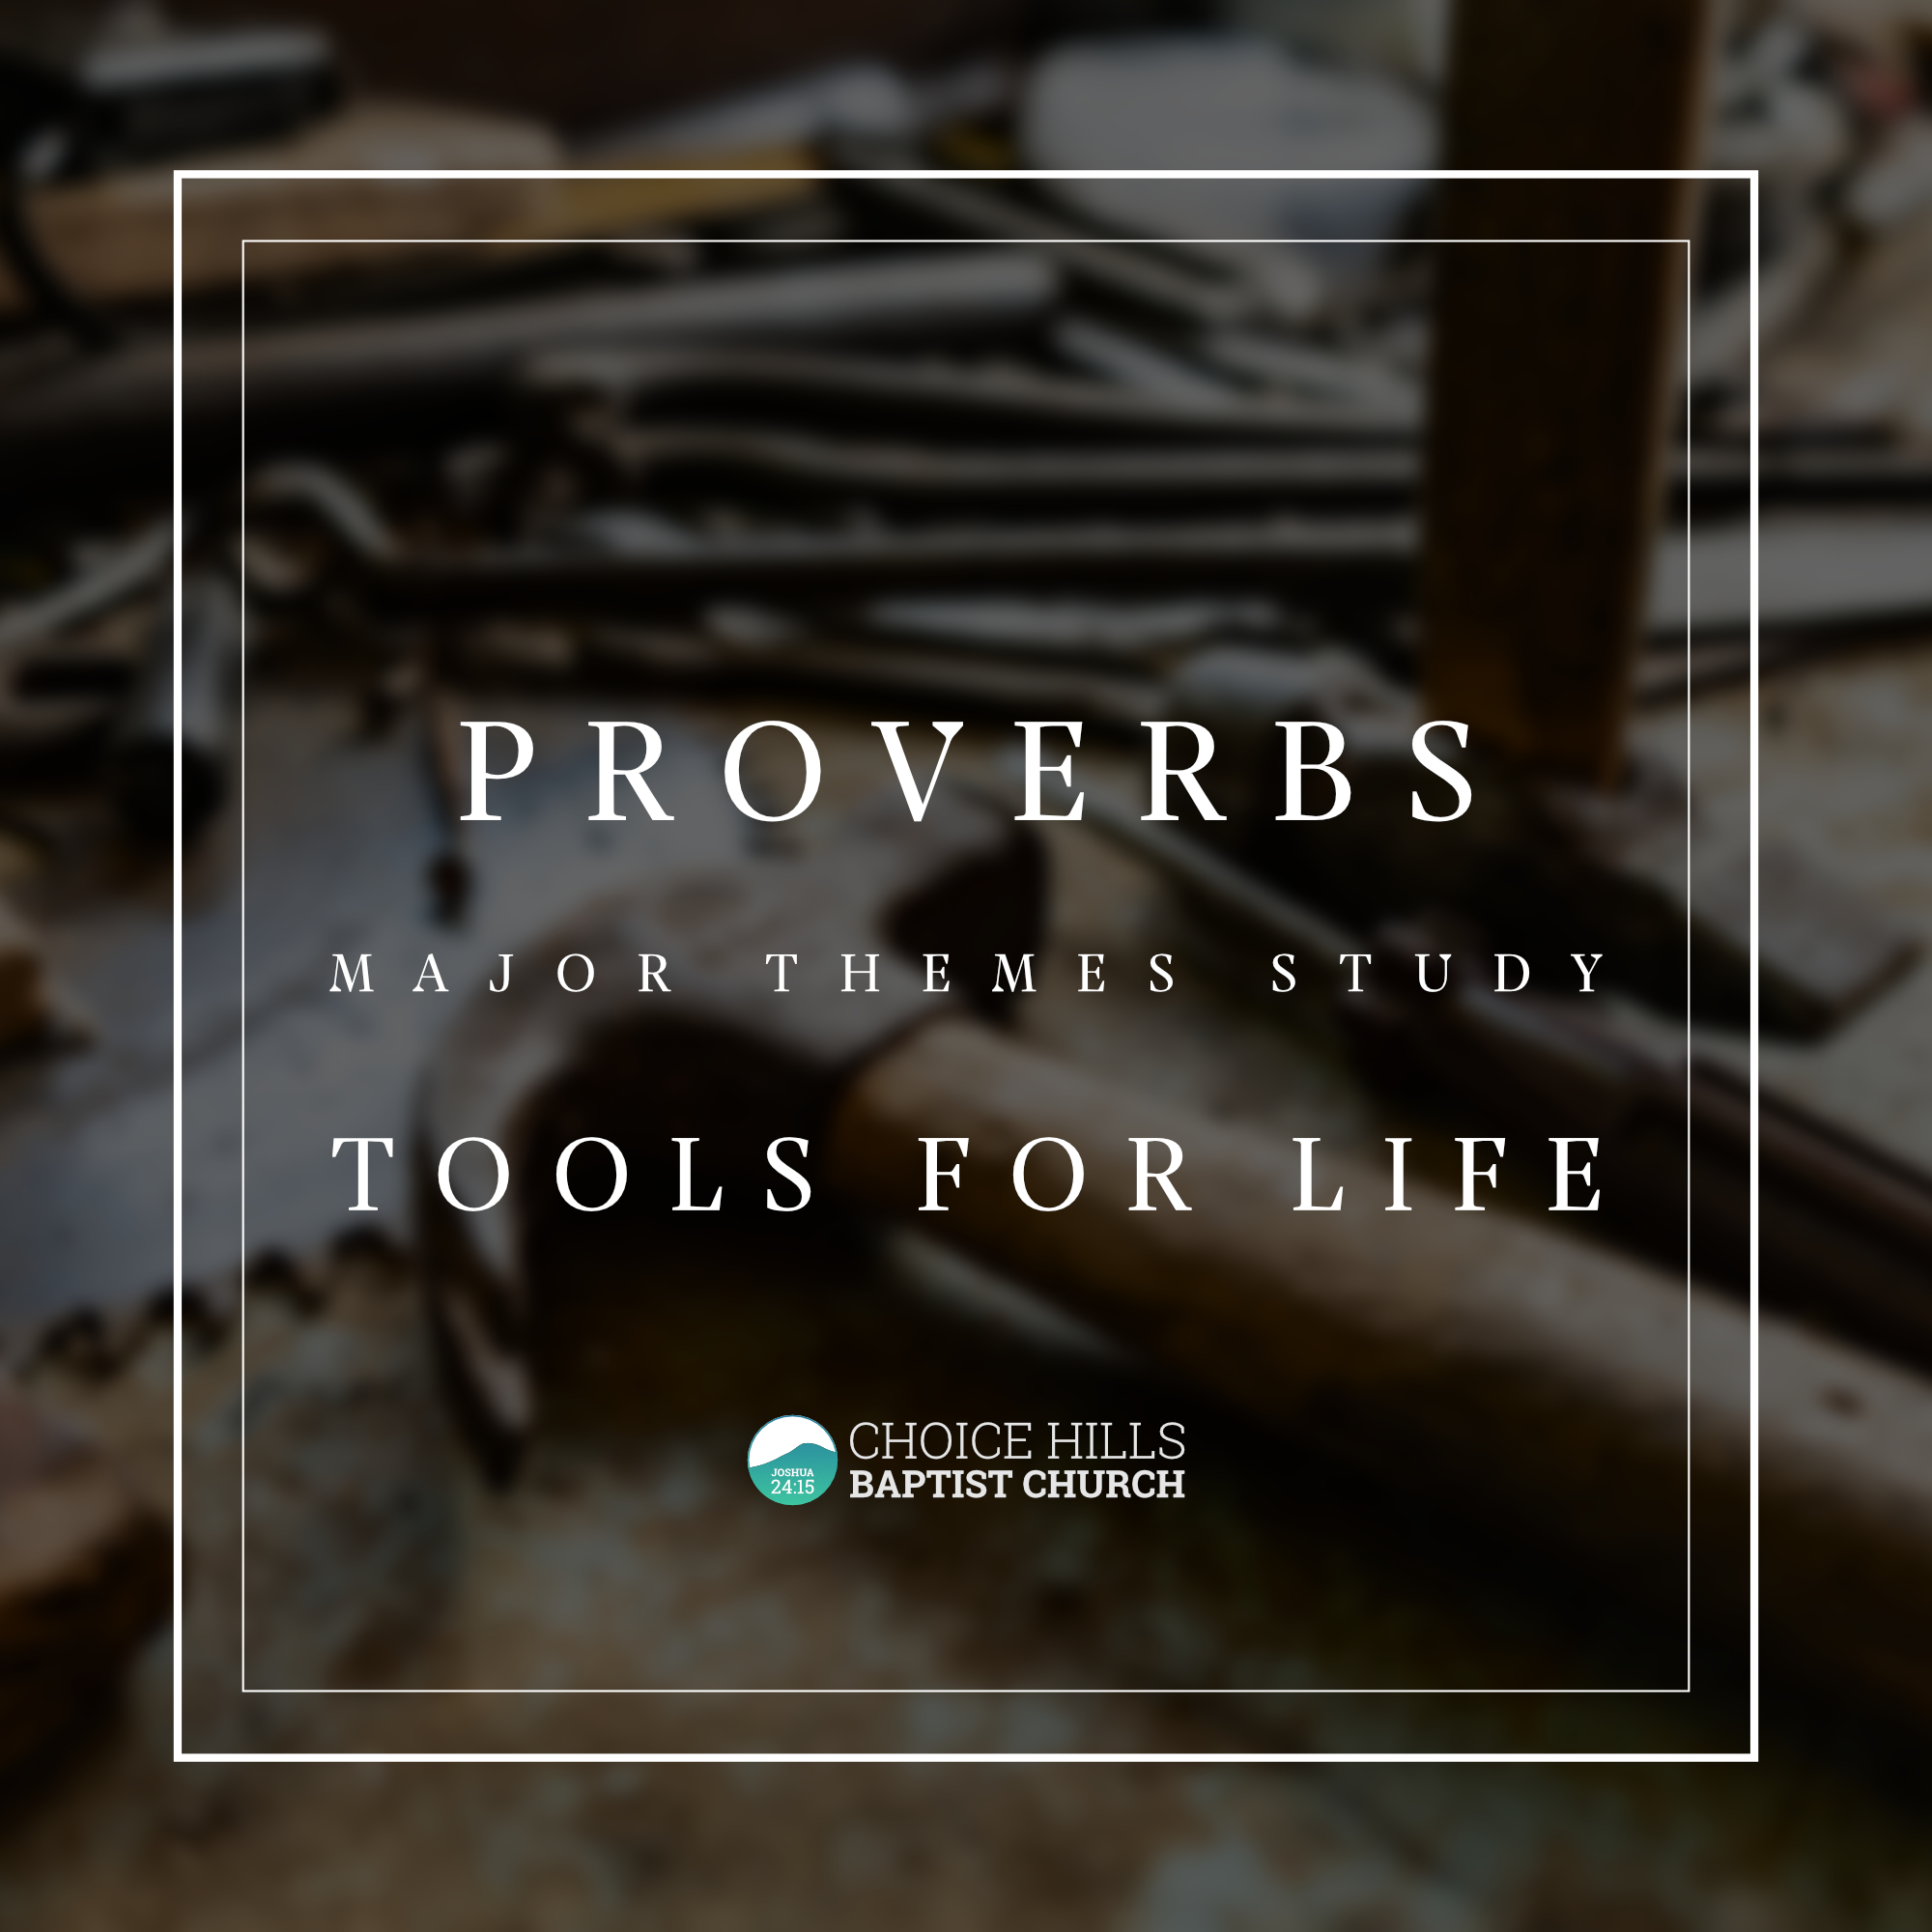 Adult Sunday School: Proverbs—Tools for Life: The Fear of the Lord (Part 2)